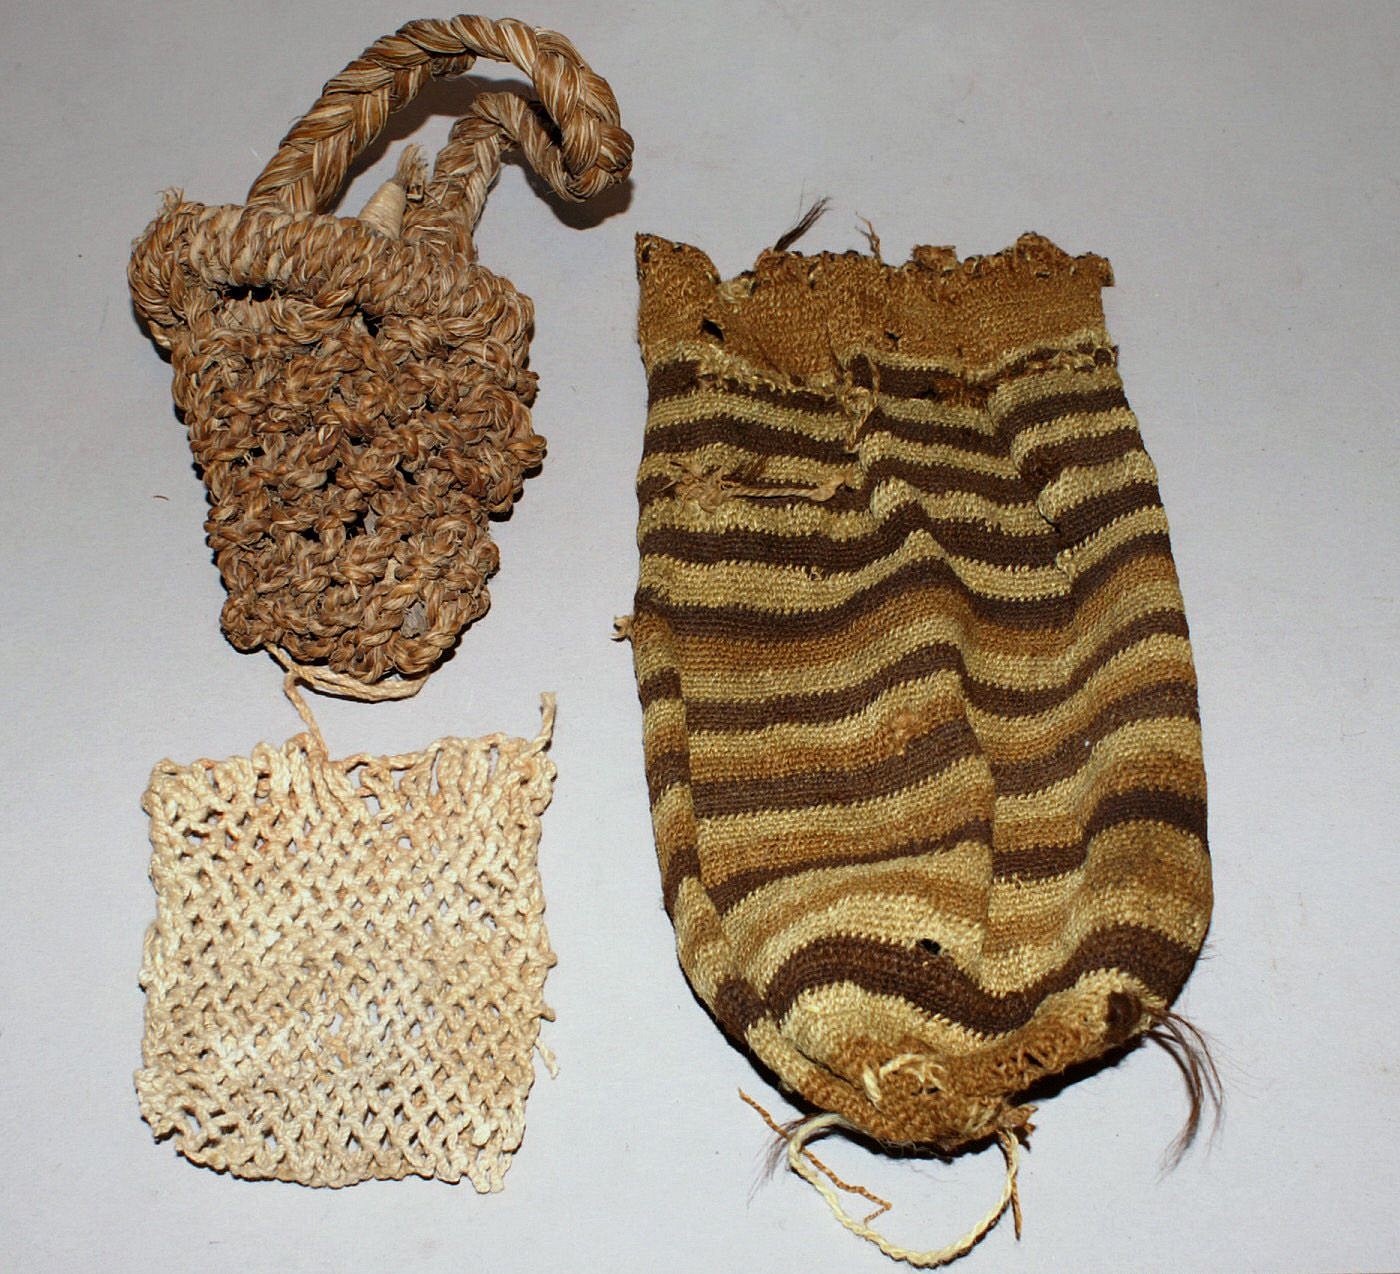 Chile, Three Types of Bags used by Fisherman
The bag with the handle is made of hemp, and would have been used for storing tools.  The white cotton bag was used to store bait for small fish.  The striped bag was made of wool with a draw string on top and a mesh on the bottom.  This bag would have been used for holding small fish.   Each bag was made with a different weaving technique.
Media: Textile
Dimensions: Lengths vary:  3"-8"
n6045